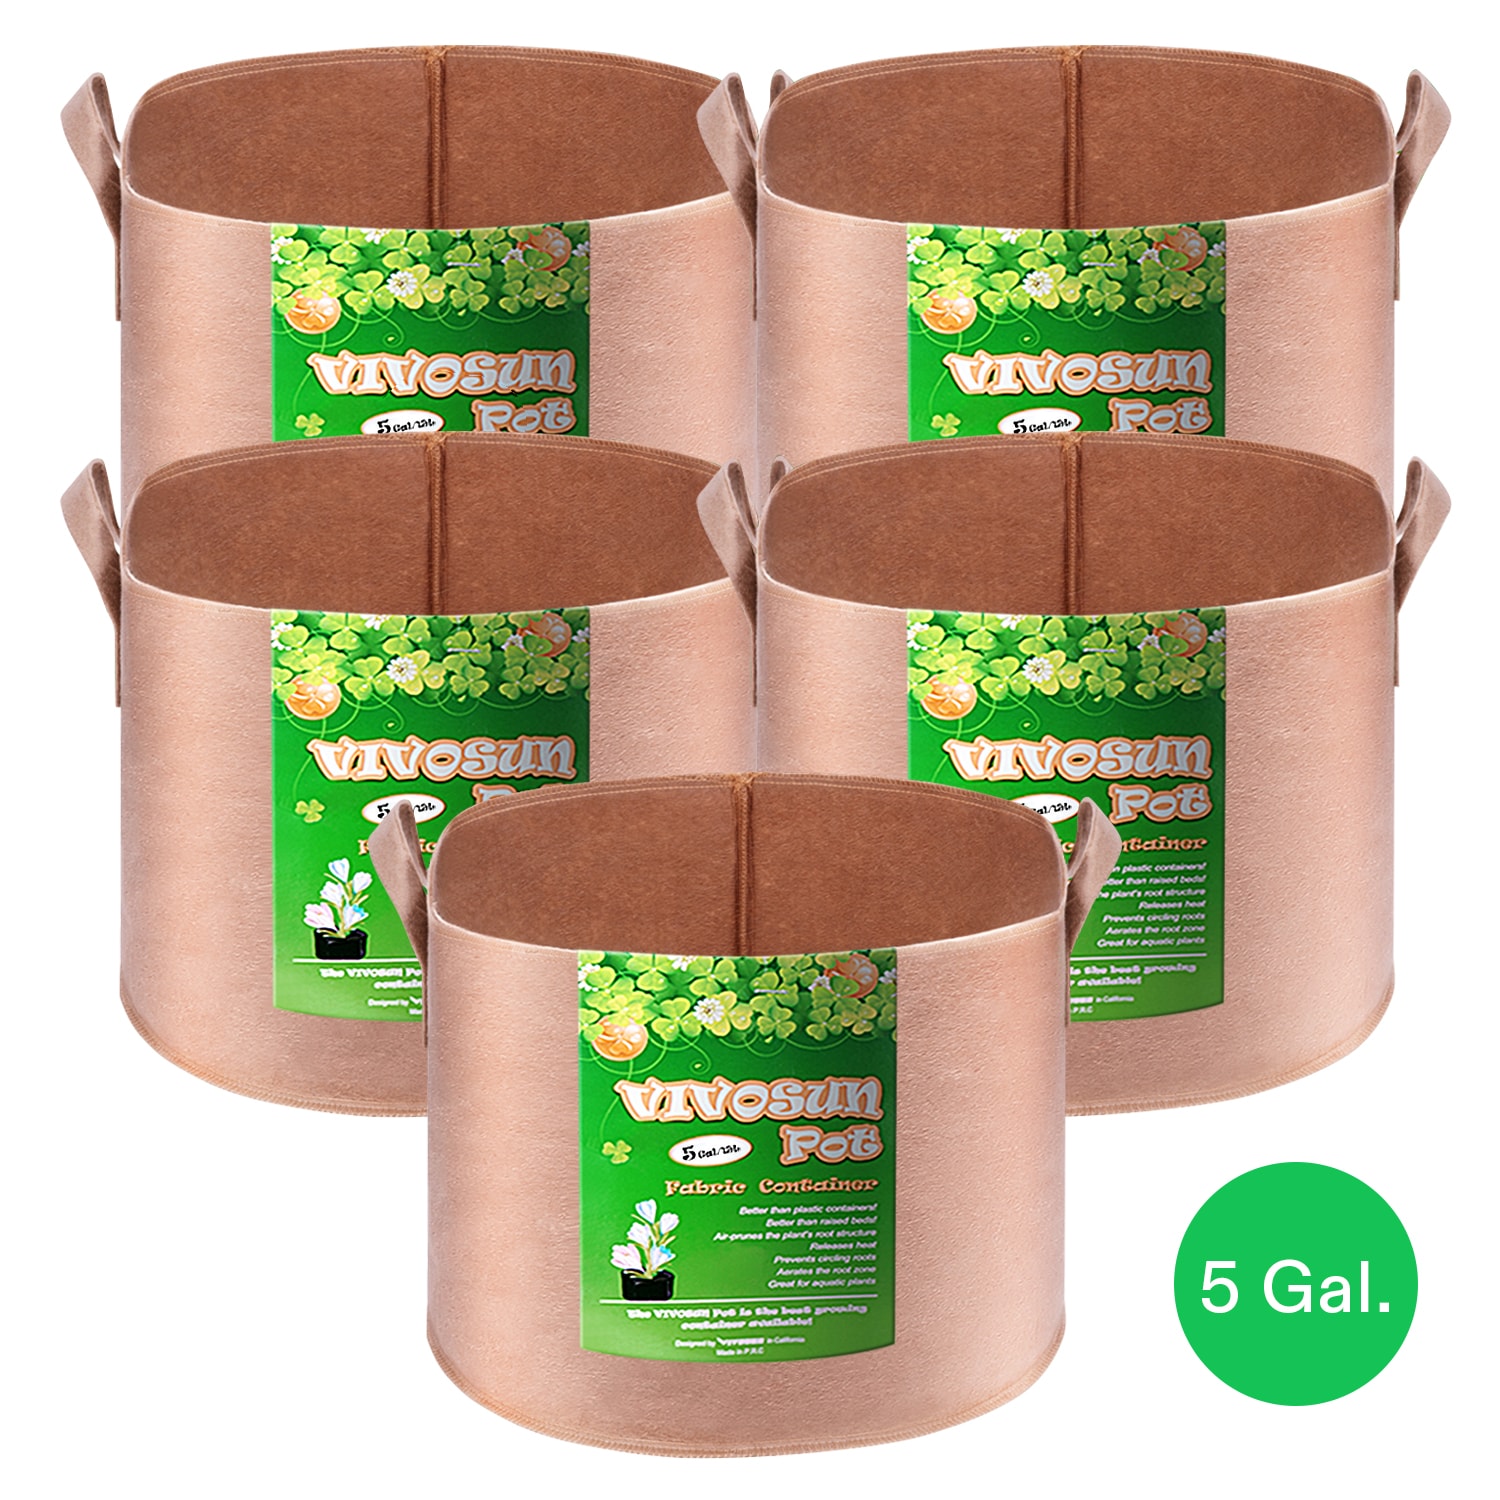 VIVOSUN 5 Gal. Heavy-Duty Nonwoven Fabric Grow Bags with Handles (5-Pack)  X001F1MPD9 - The Home Depot